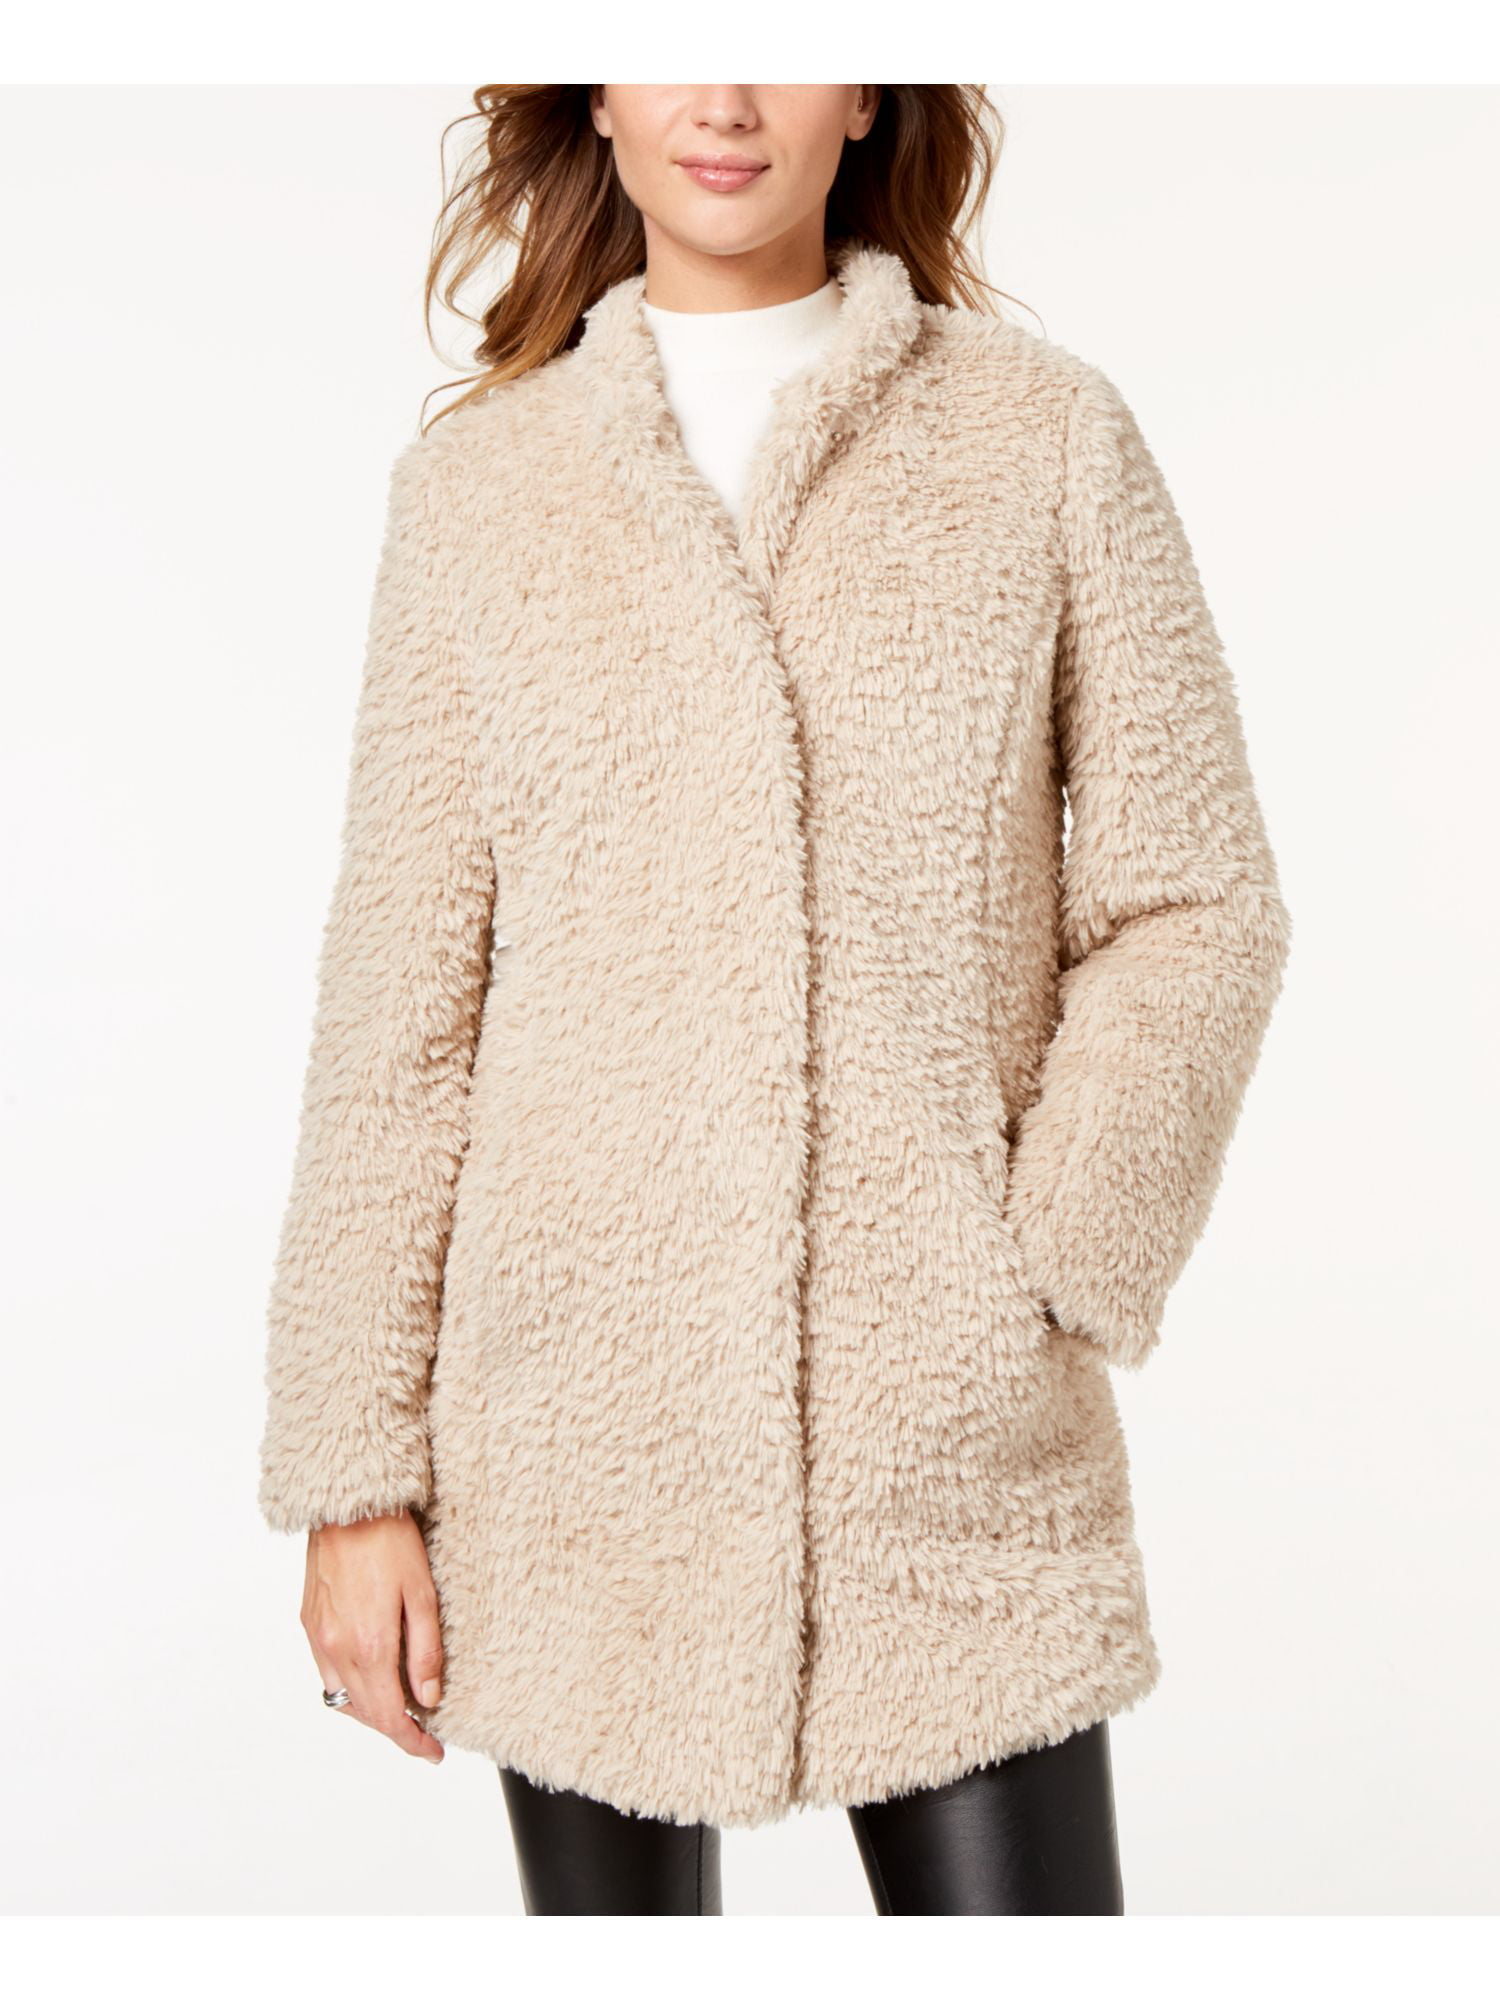 KENNETH COLE Beige Faux Fur Pocketed Coat Size: -